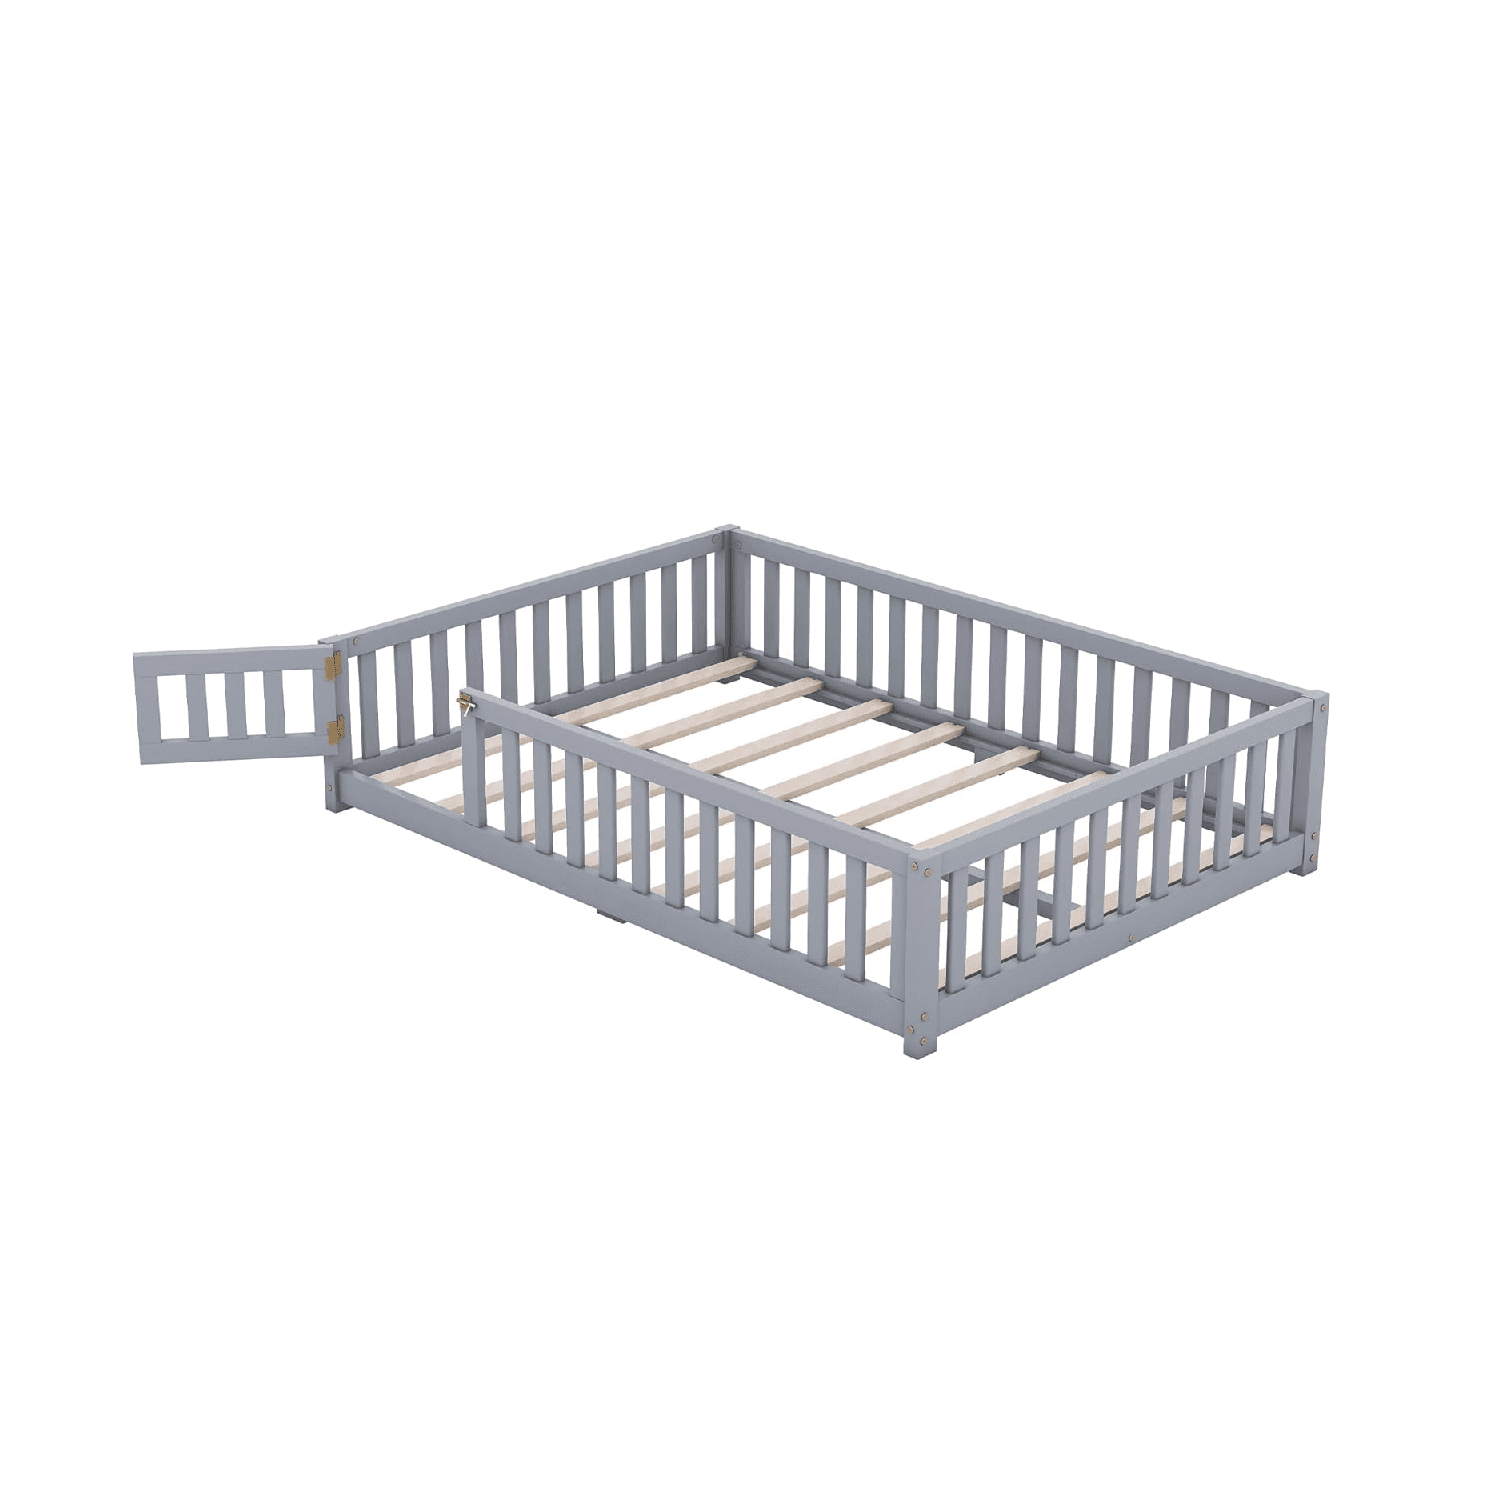 Montessori CITYLIGHT Full Size Floor Bed With Rails and Slats Gray